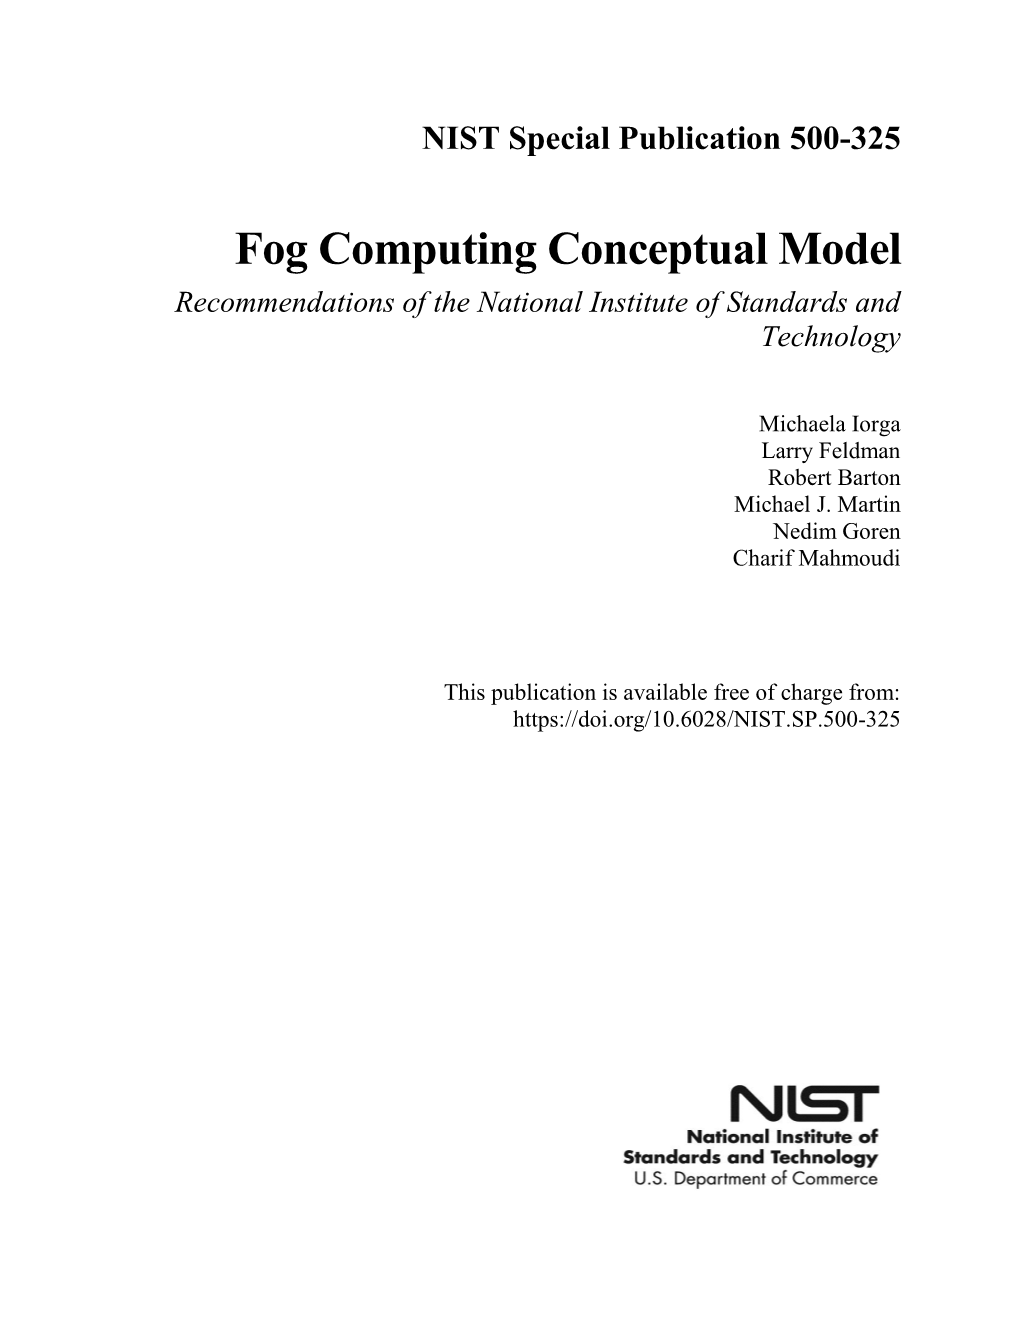 Fog Computing Conceptual Model Recommendations of the National Institute of Standards and Technology